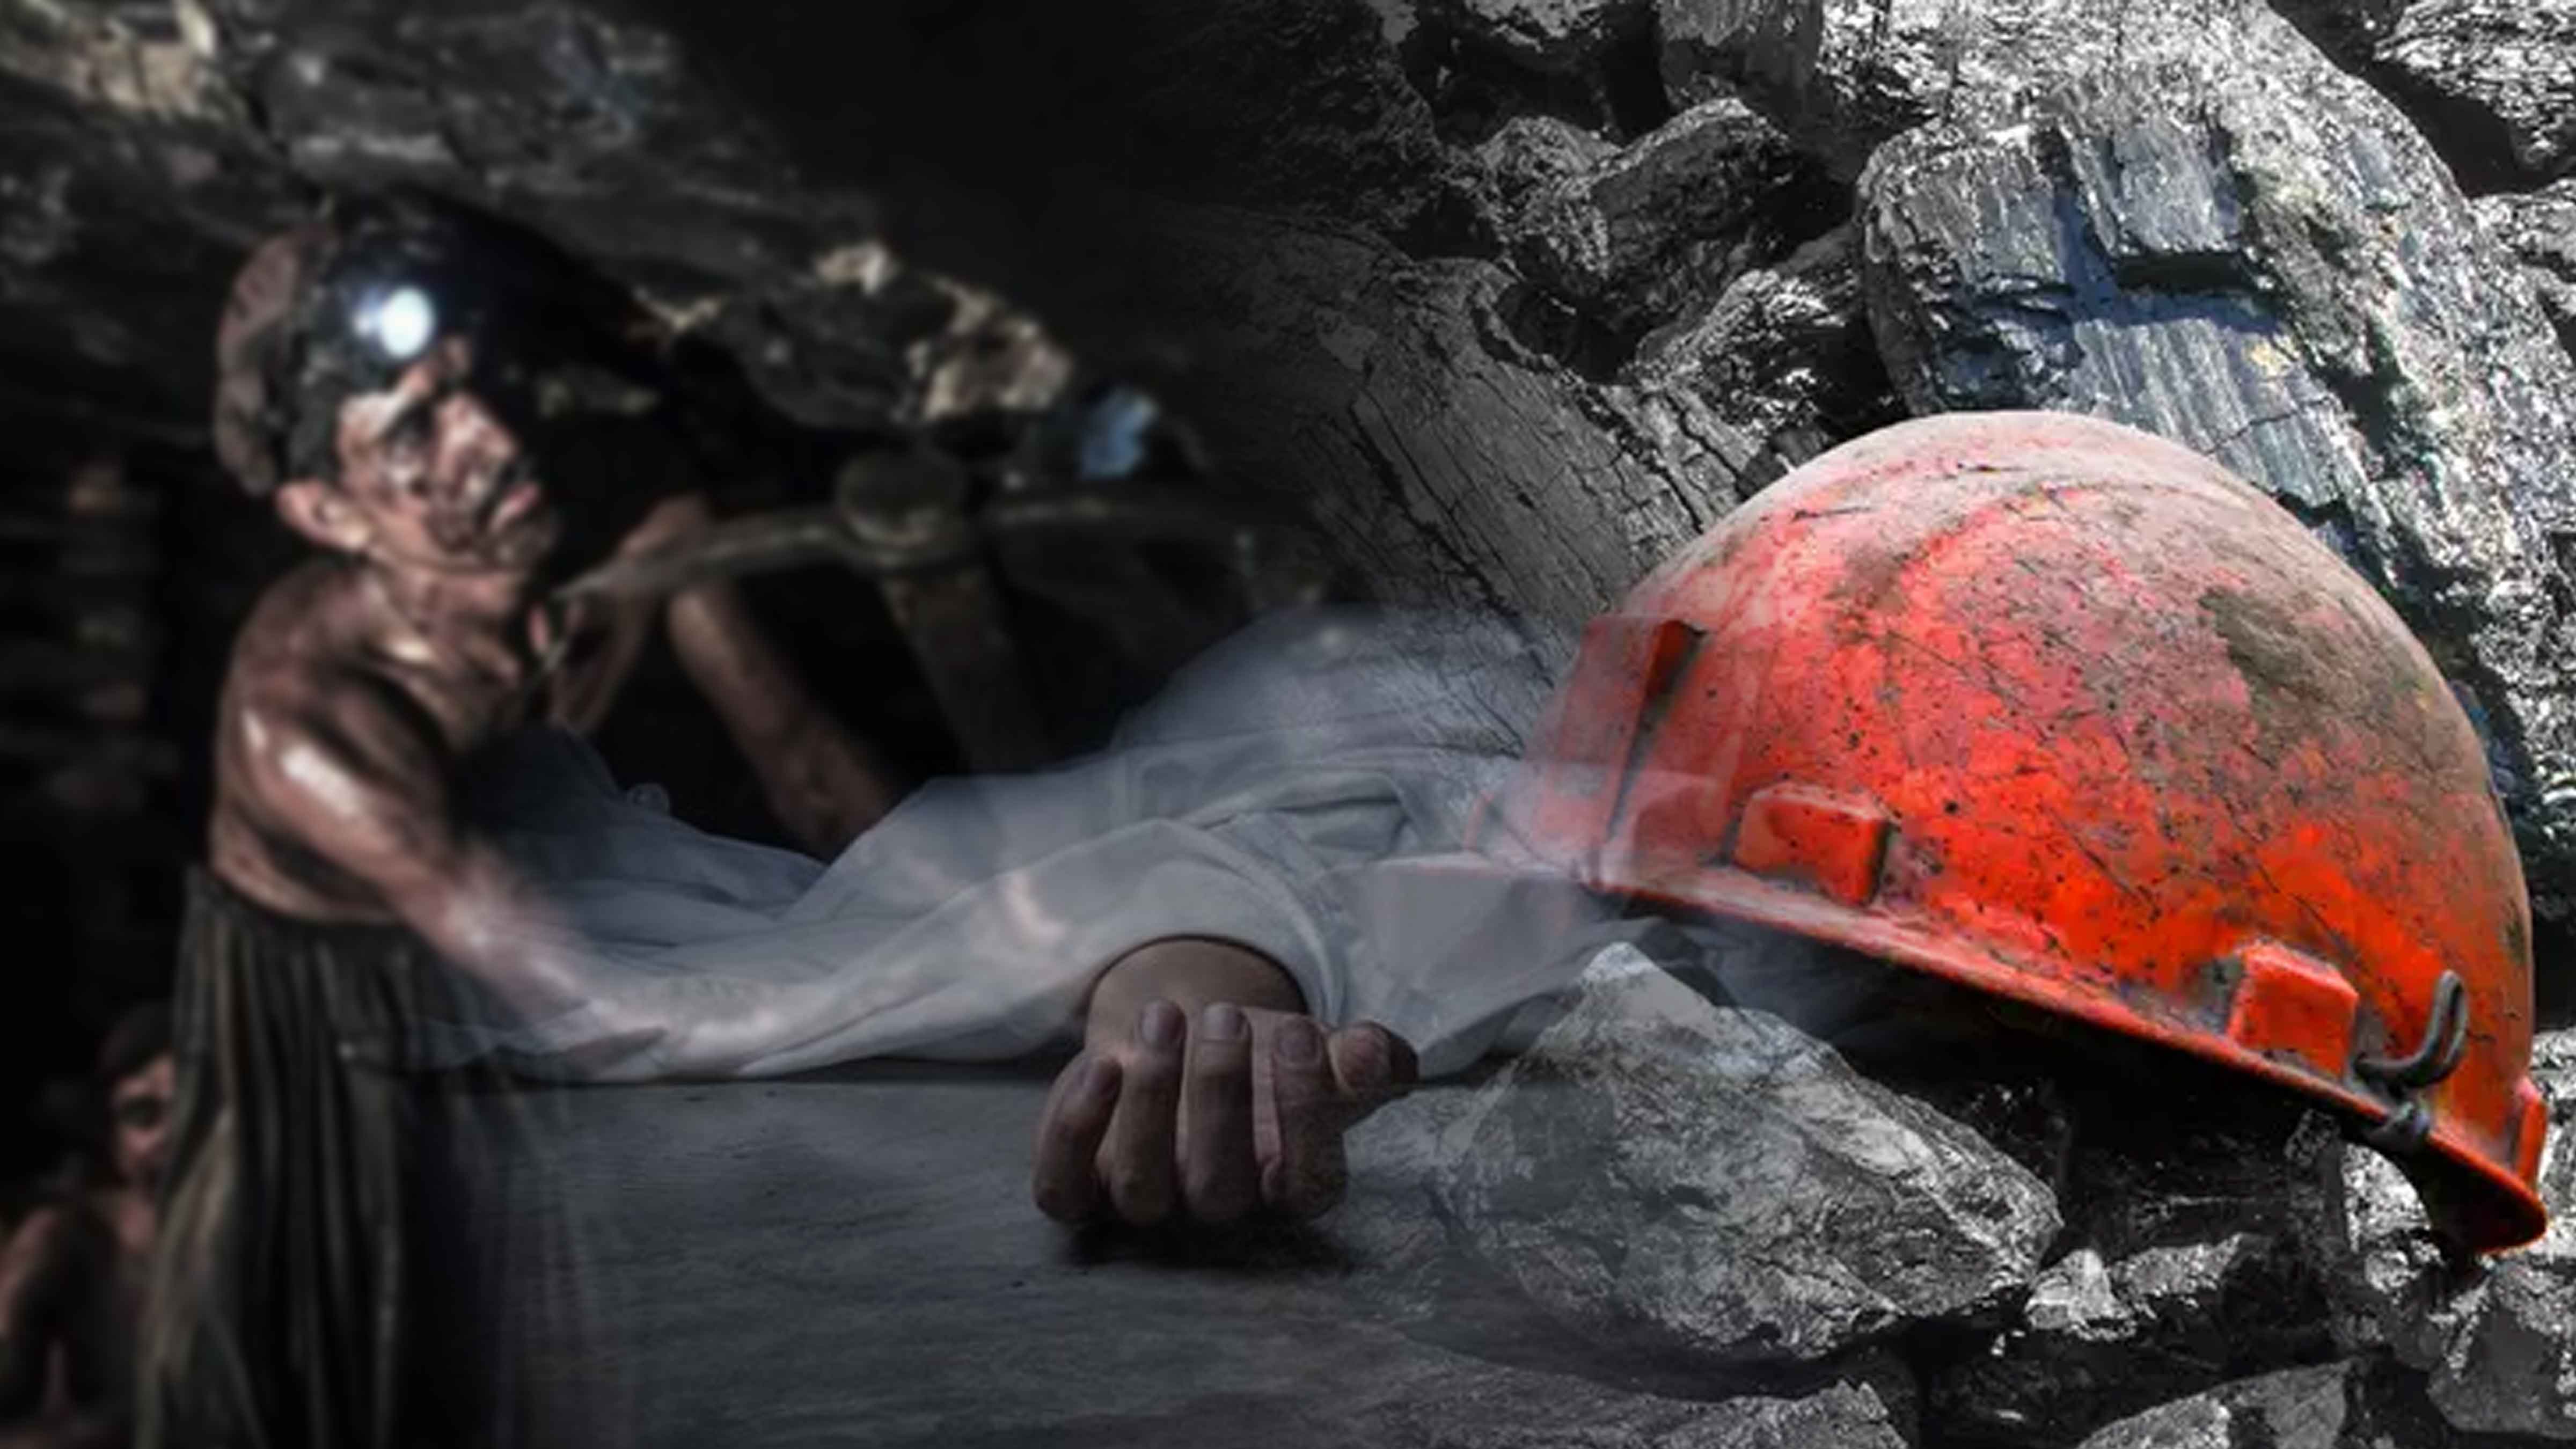 Balochistan Mining Tragedy: 11 Dead, Many More at Risk